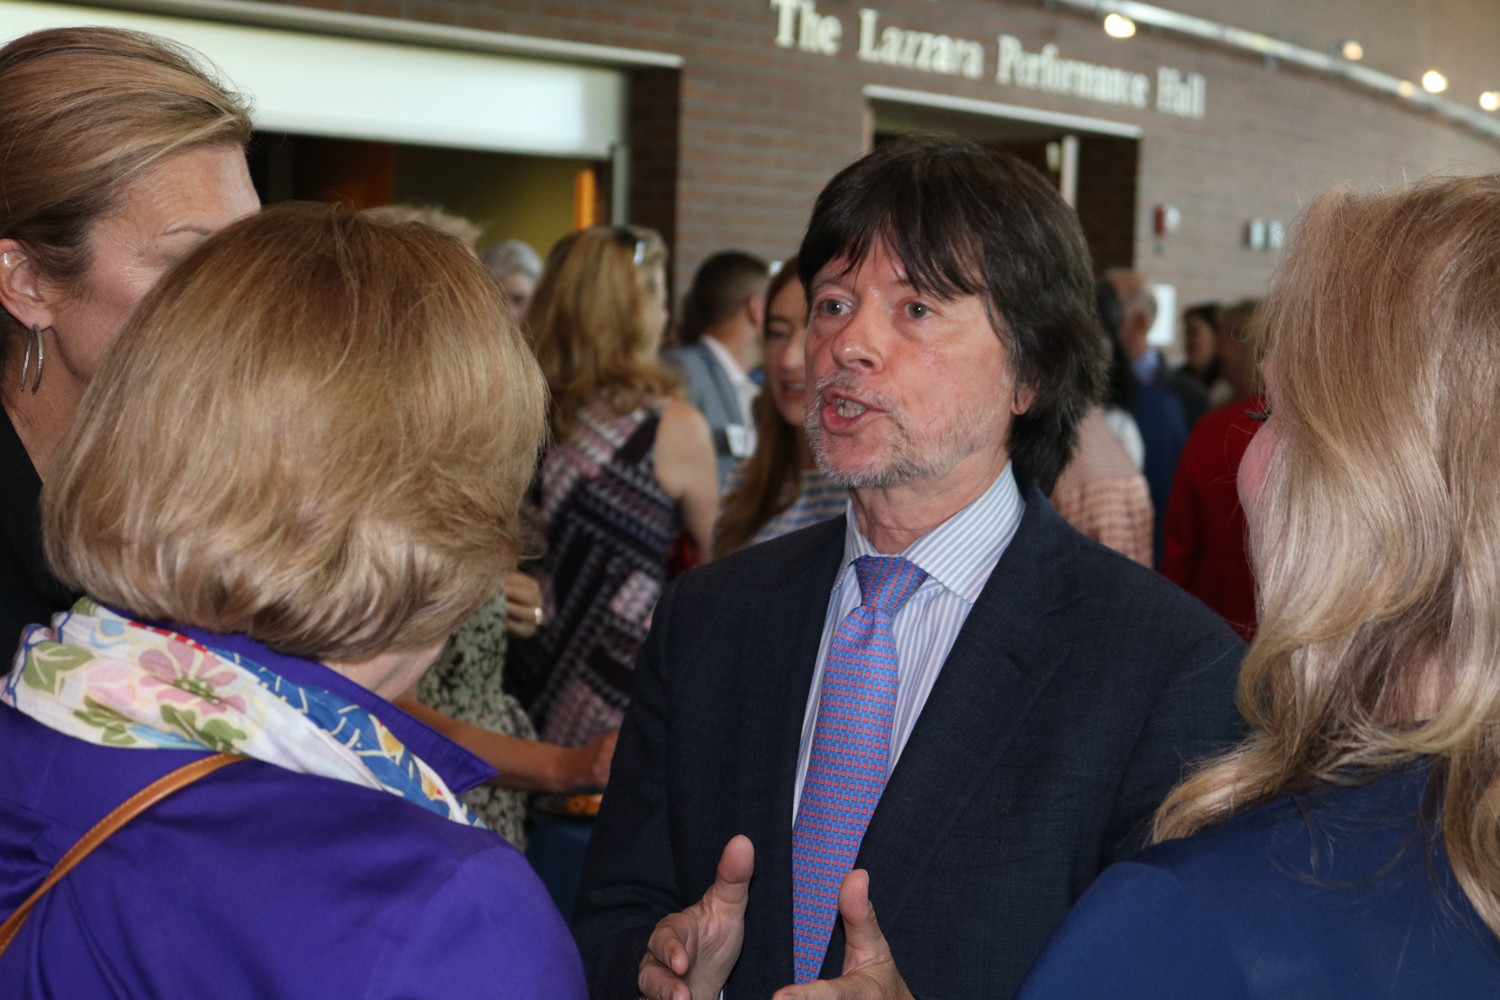 Ken Burns meets with attendees of the screening at a VIP reception.